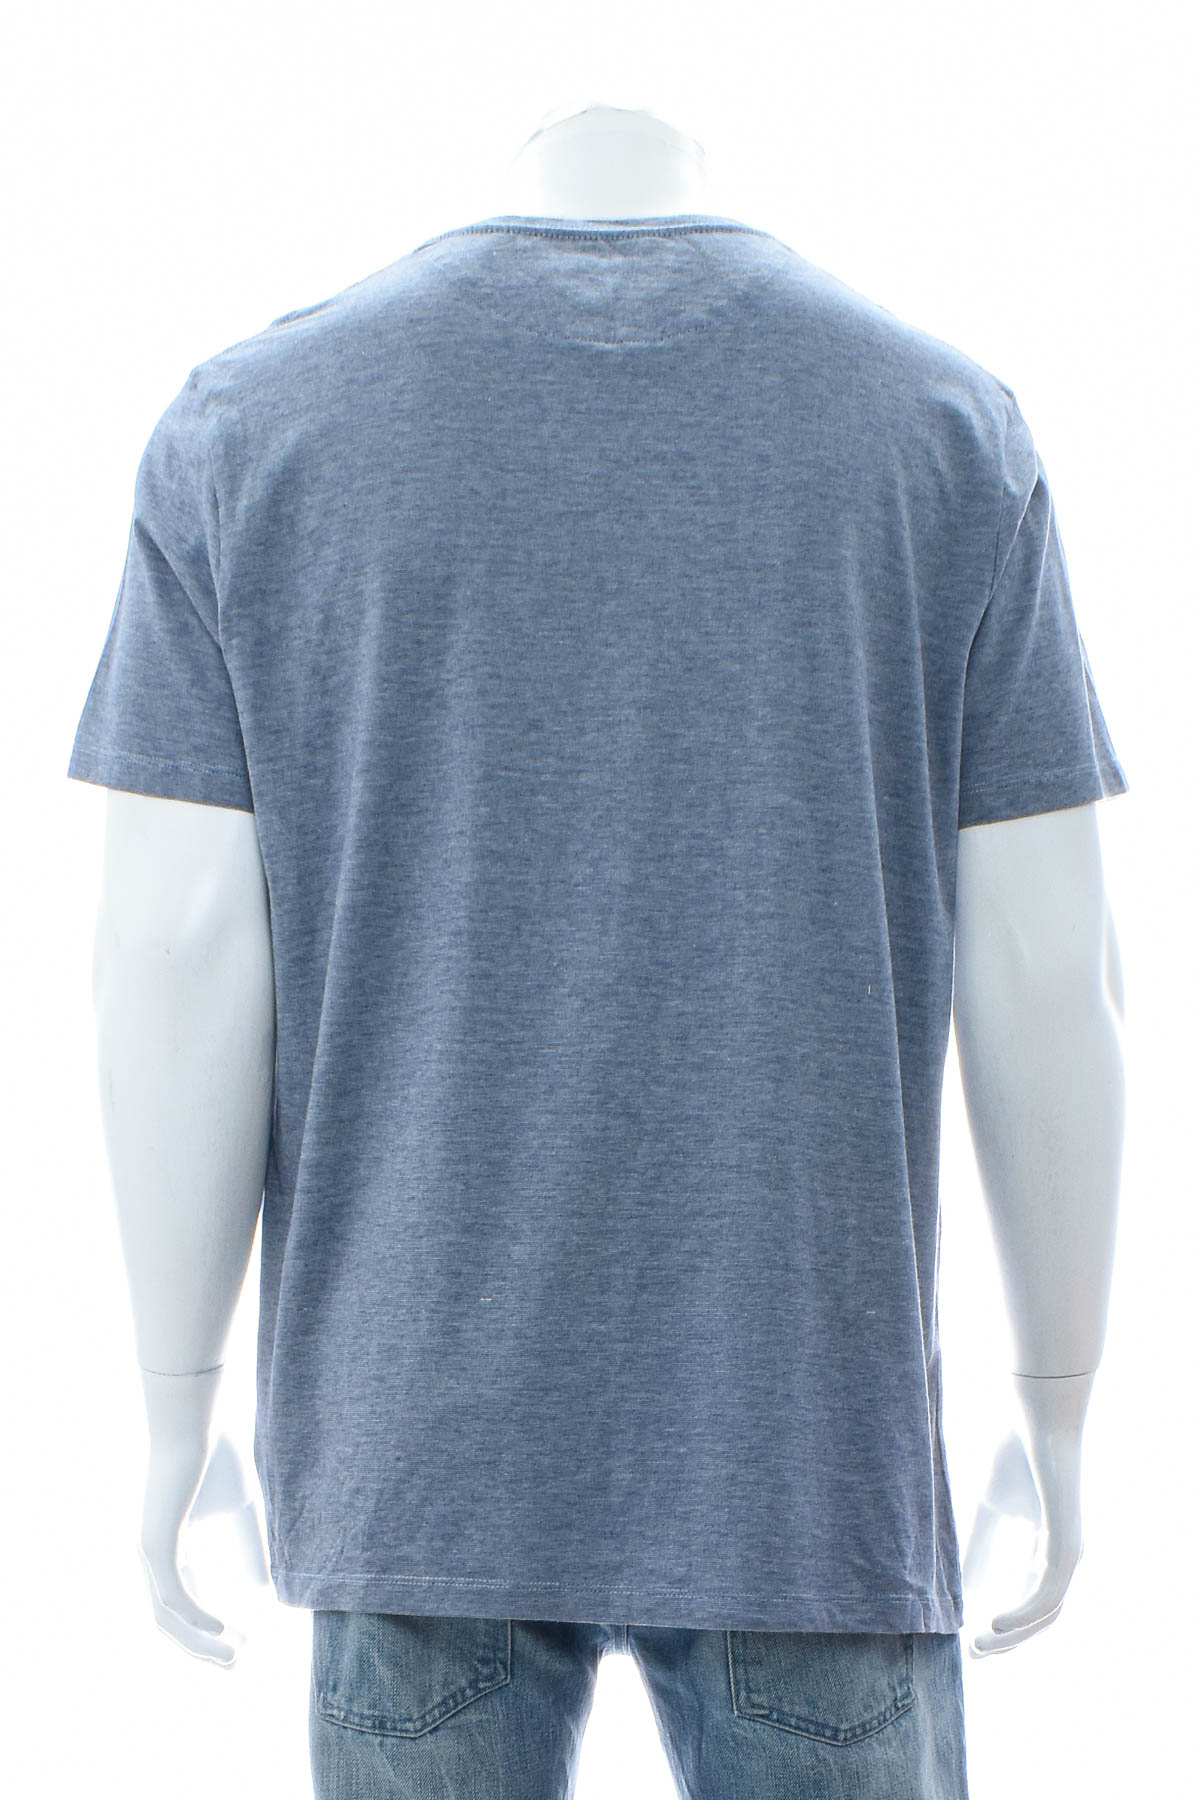 Men's T-shirt - Target LIMITED EDITIONS - 1